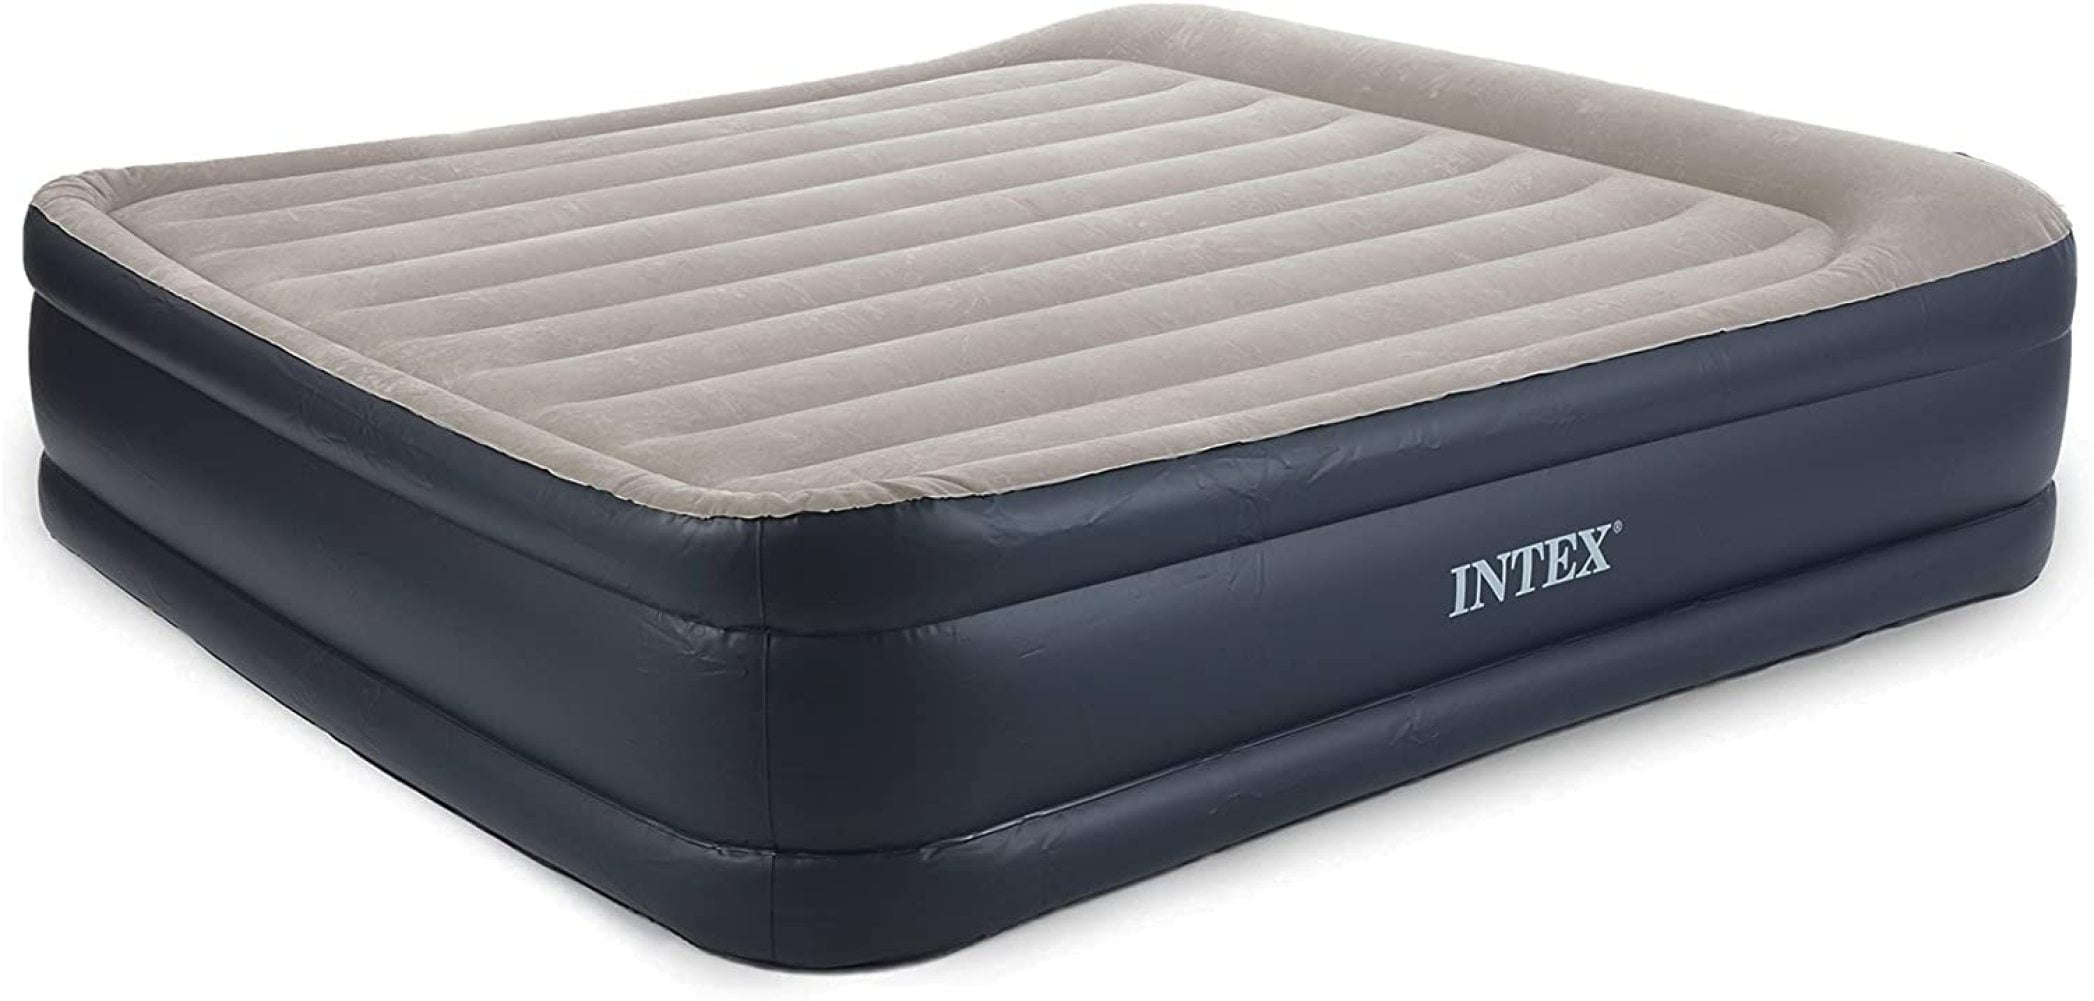 Queen Raised Airbed Air Bed Blow Up Mattress Rest Inflatable WITH PUMP Camping 